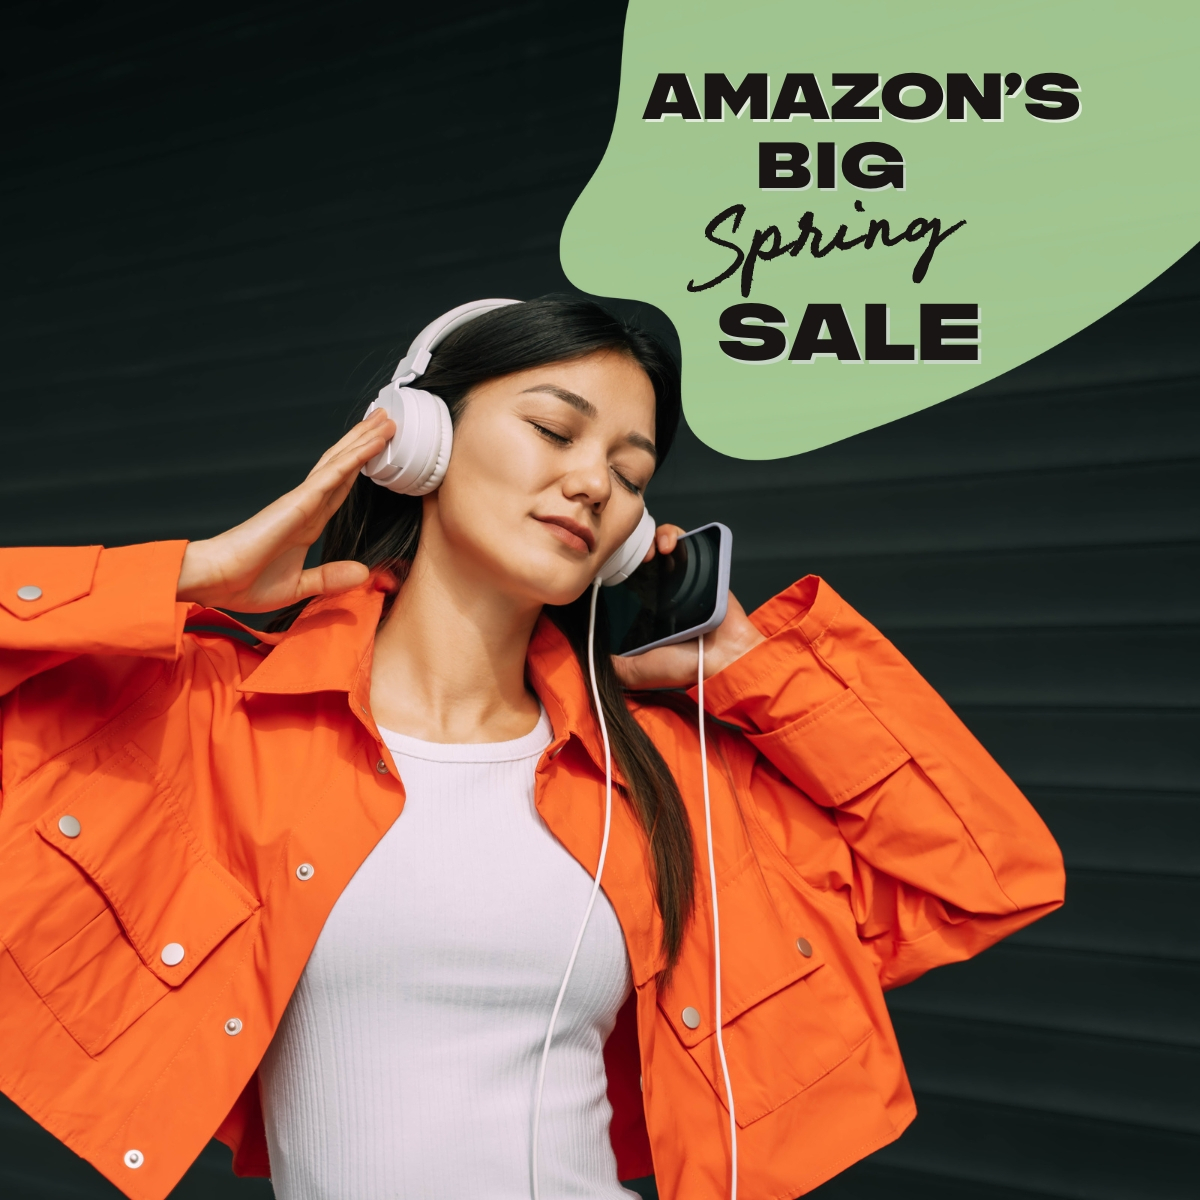 Do not Miss Out on the Greatest Headphone Offers at Amazon’s Large Spring Sale